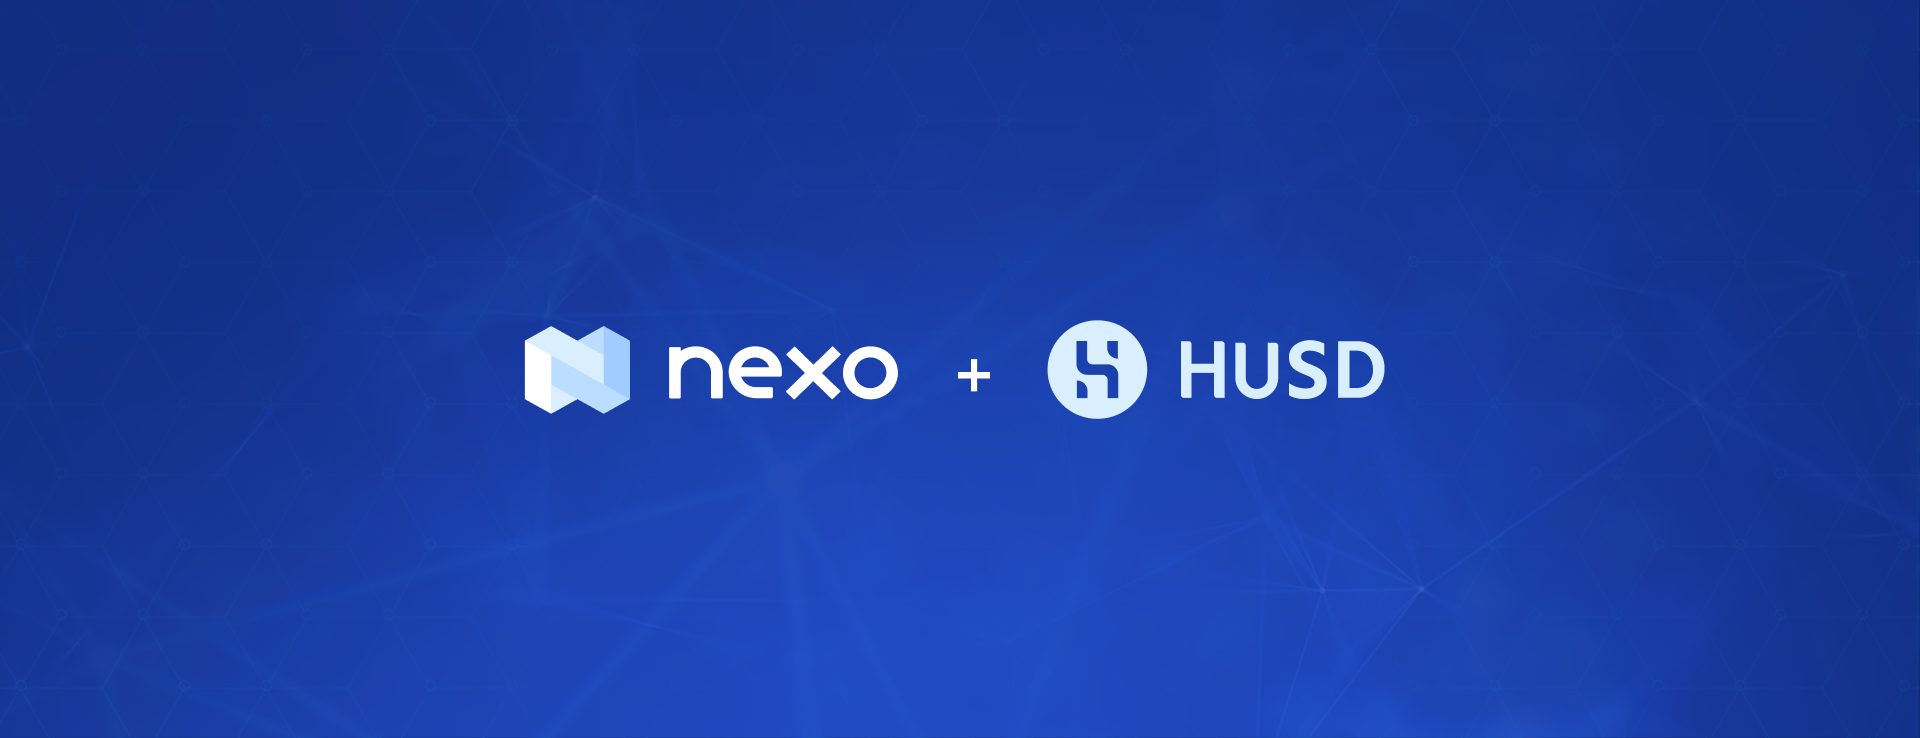 HUSD Now Available on Nexo